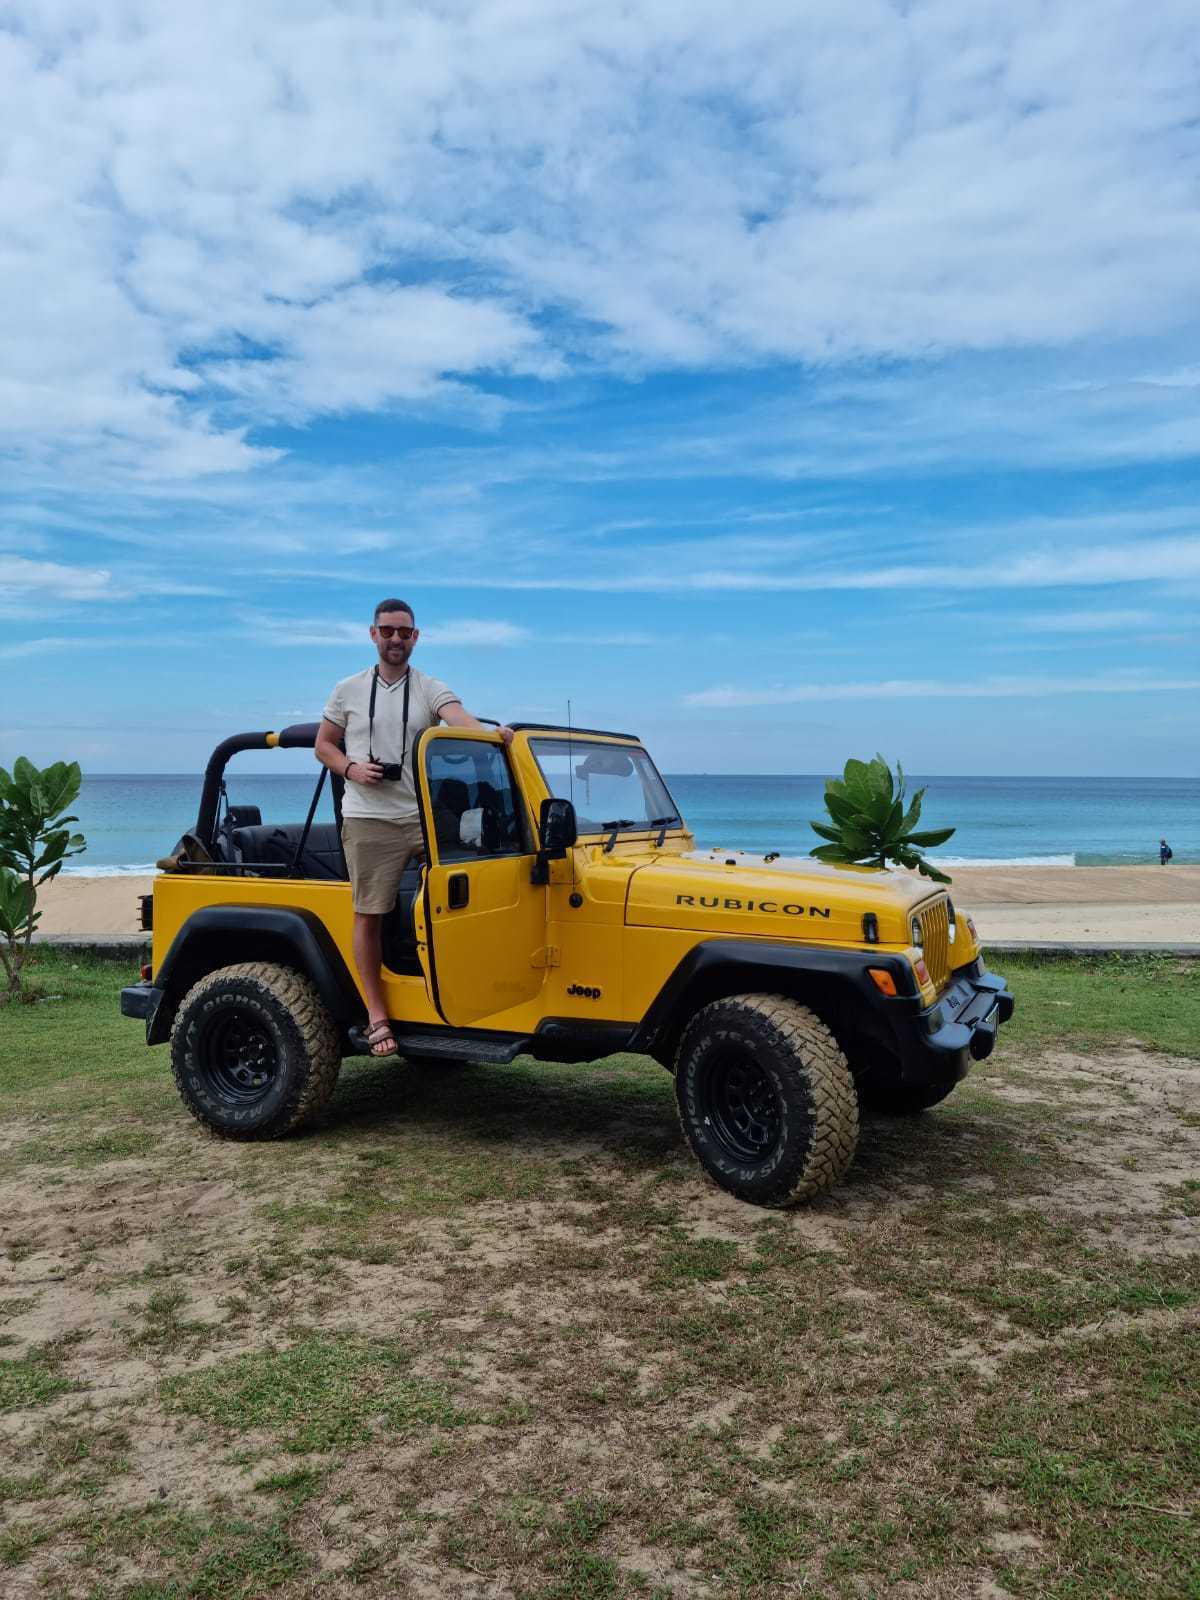 A man standing at the open door of a yellow Jeep Rubicon with a view of the ocean in the background.